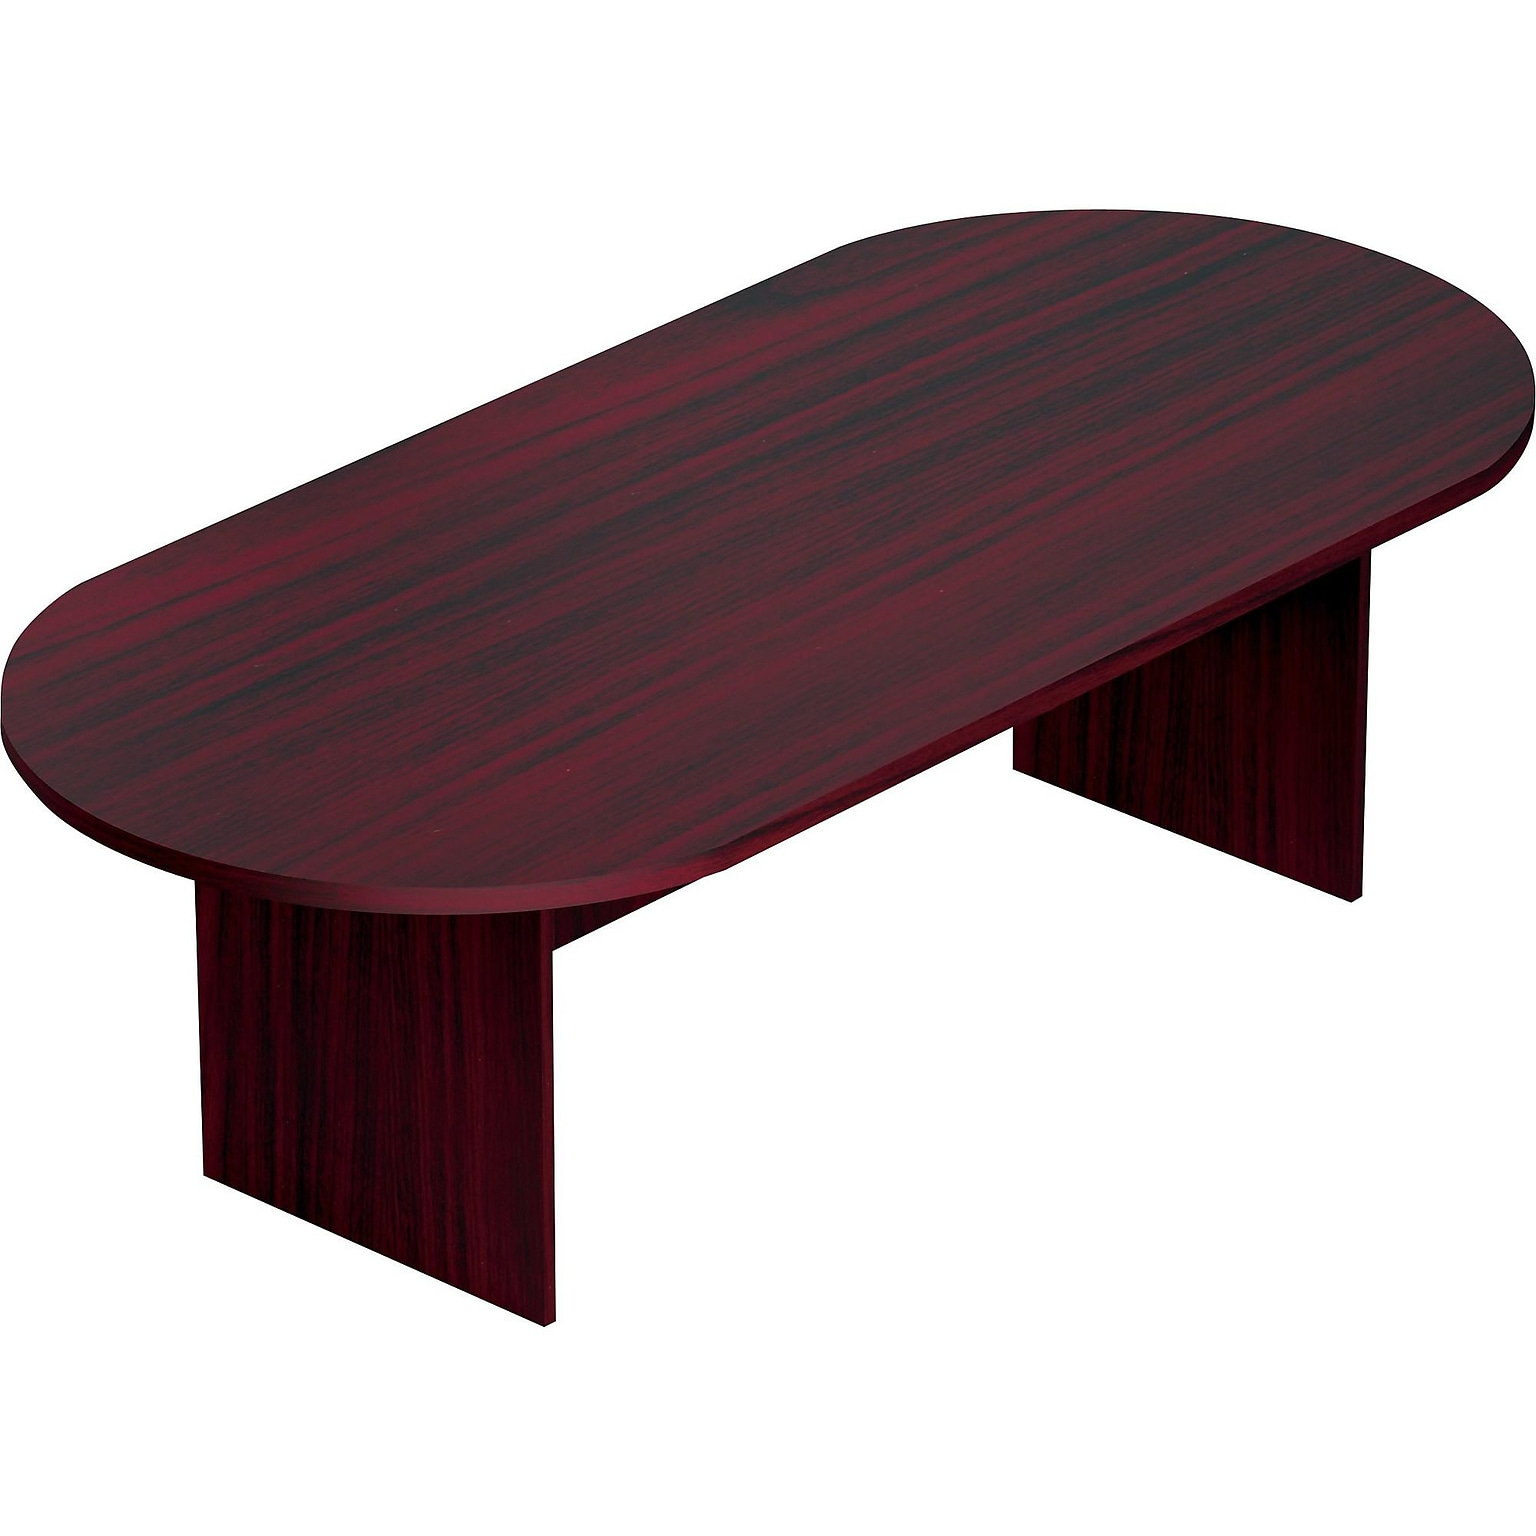 Offices To Go Superior Laminate 95L Racetrack Conference Table, American Mahogany (SL9544RS-AML)